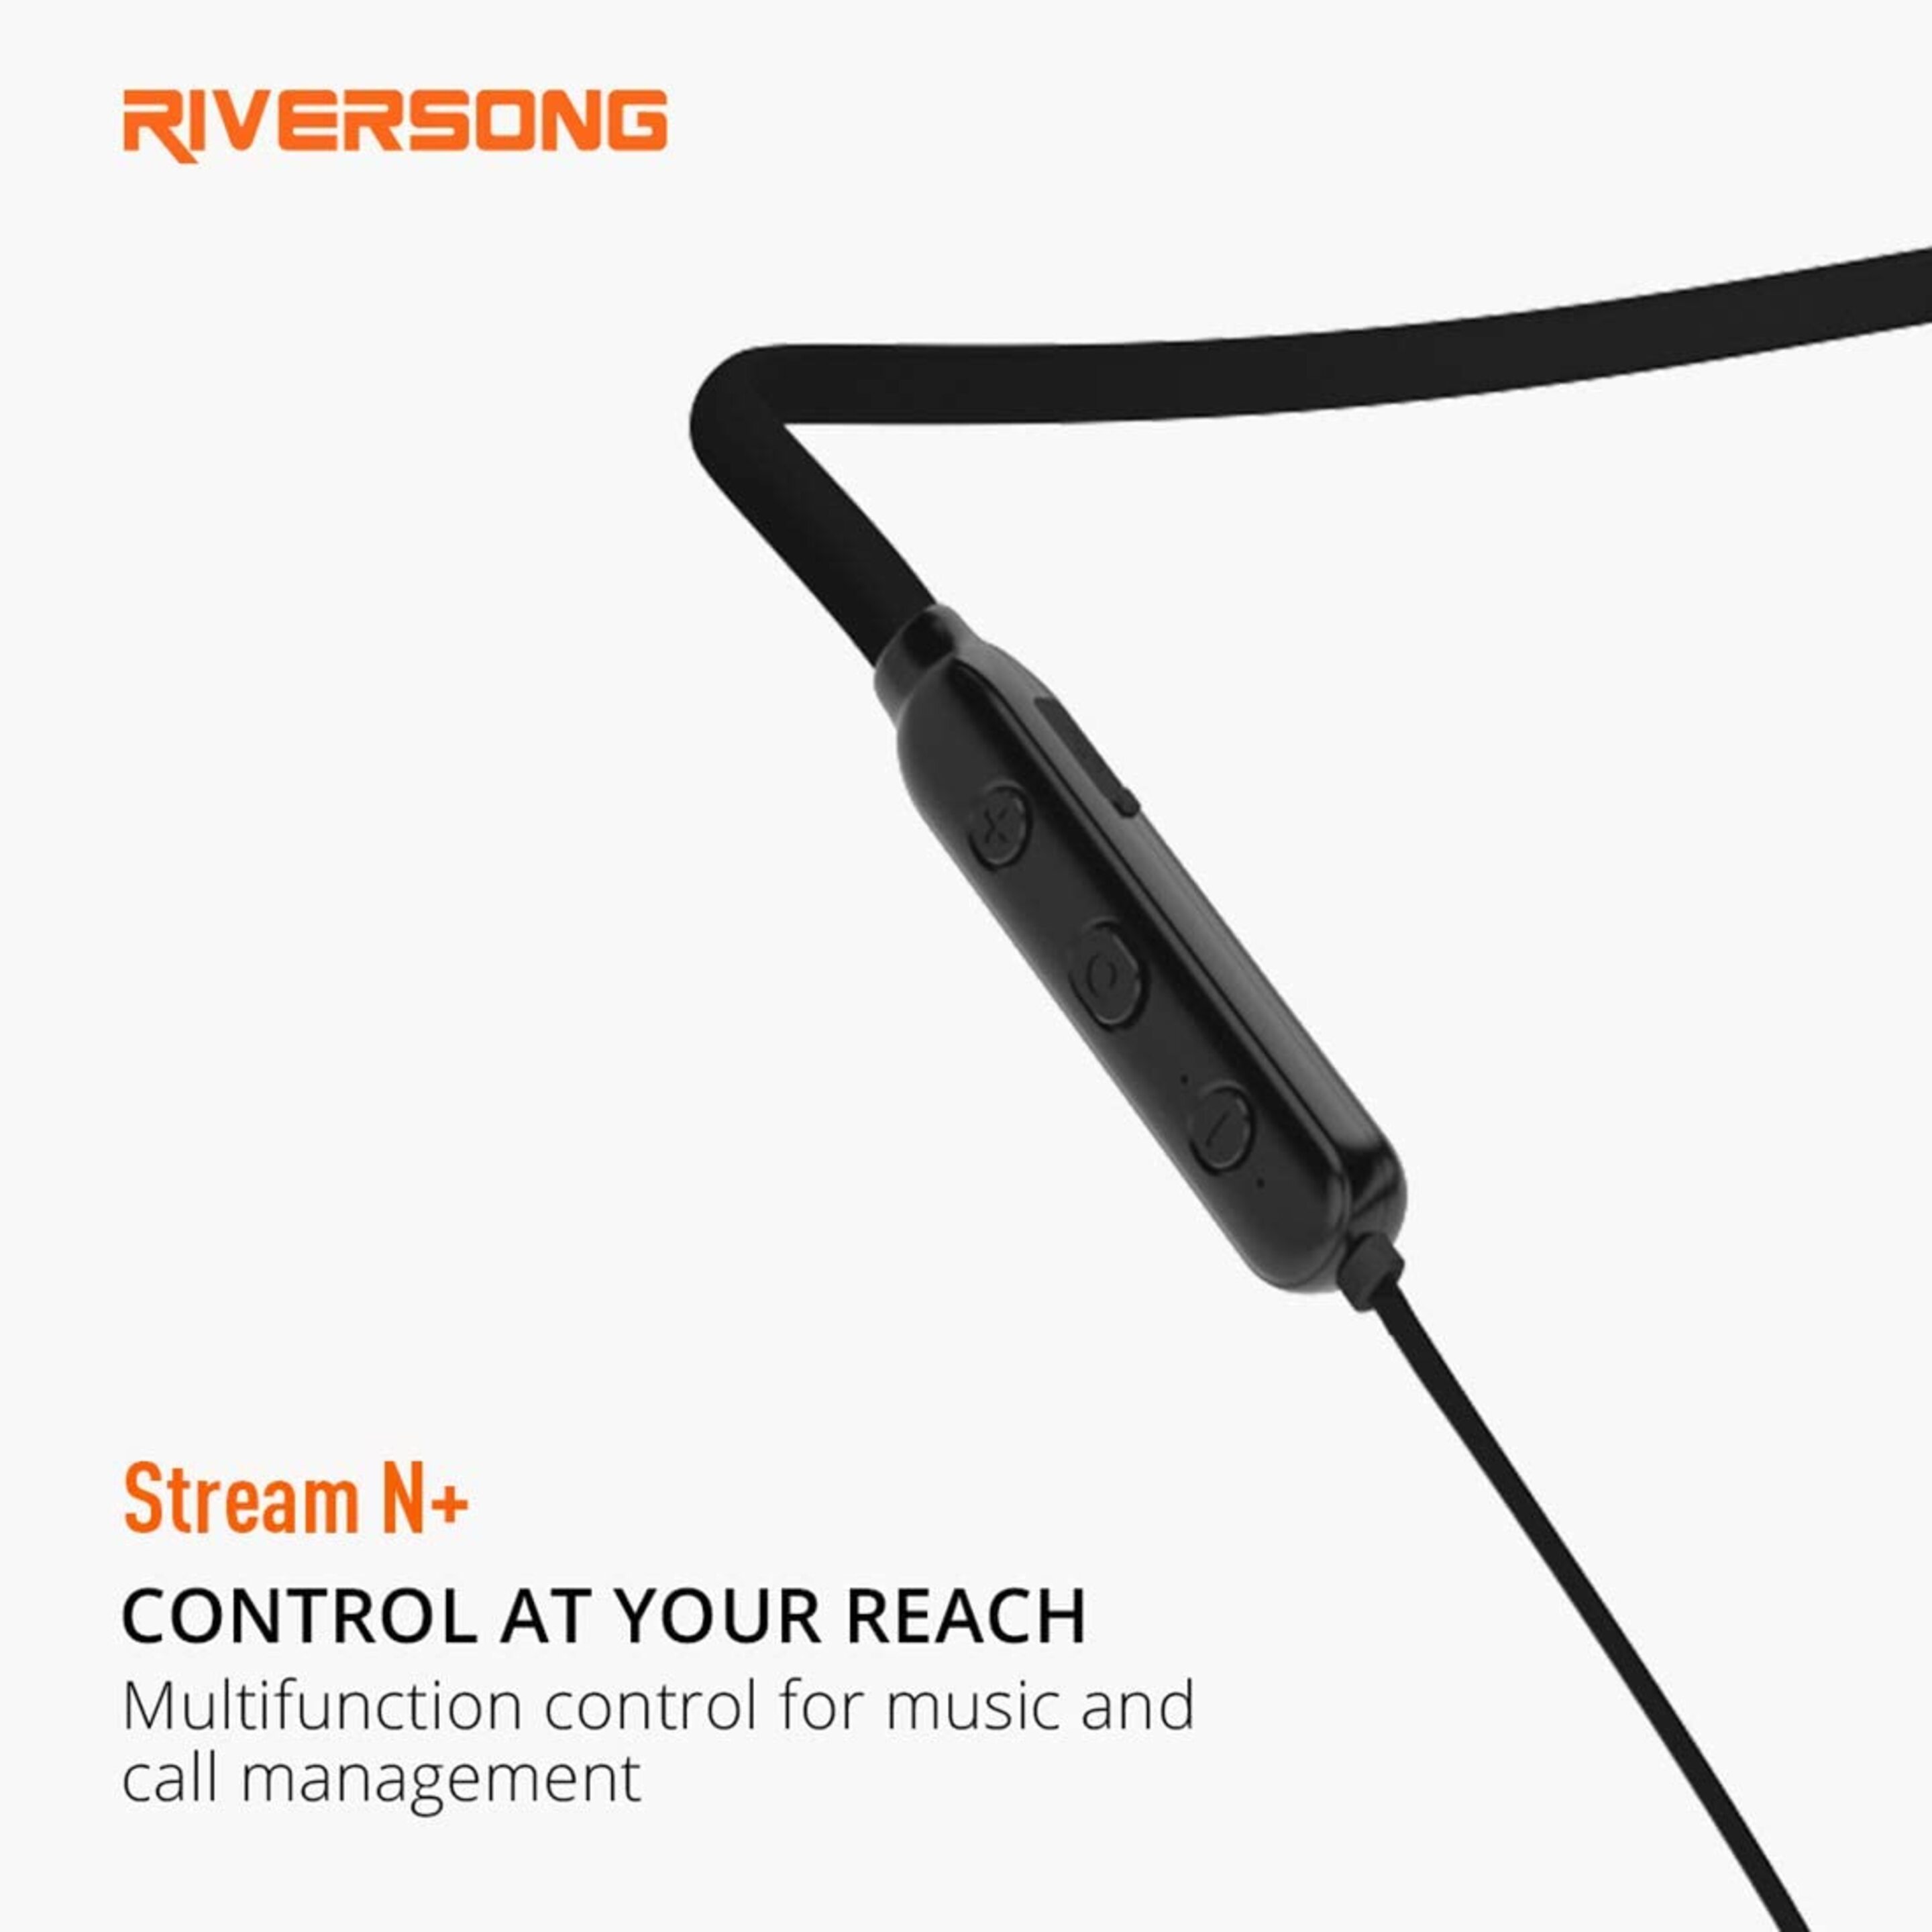 Riversong Stream N+ Auriculares Inalámbricos